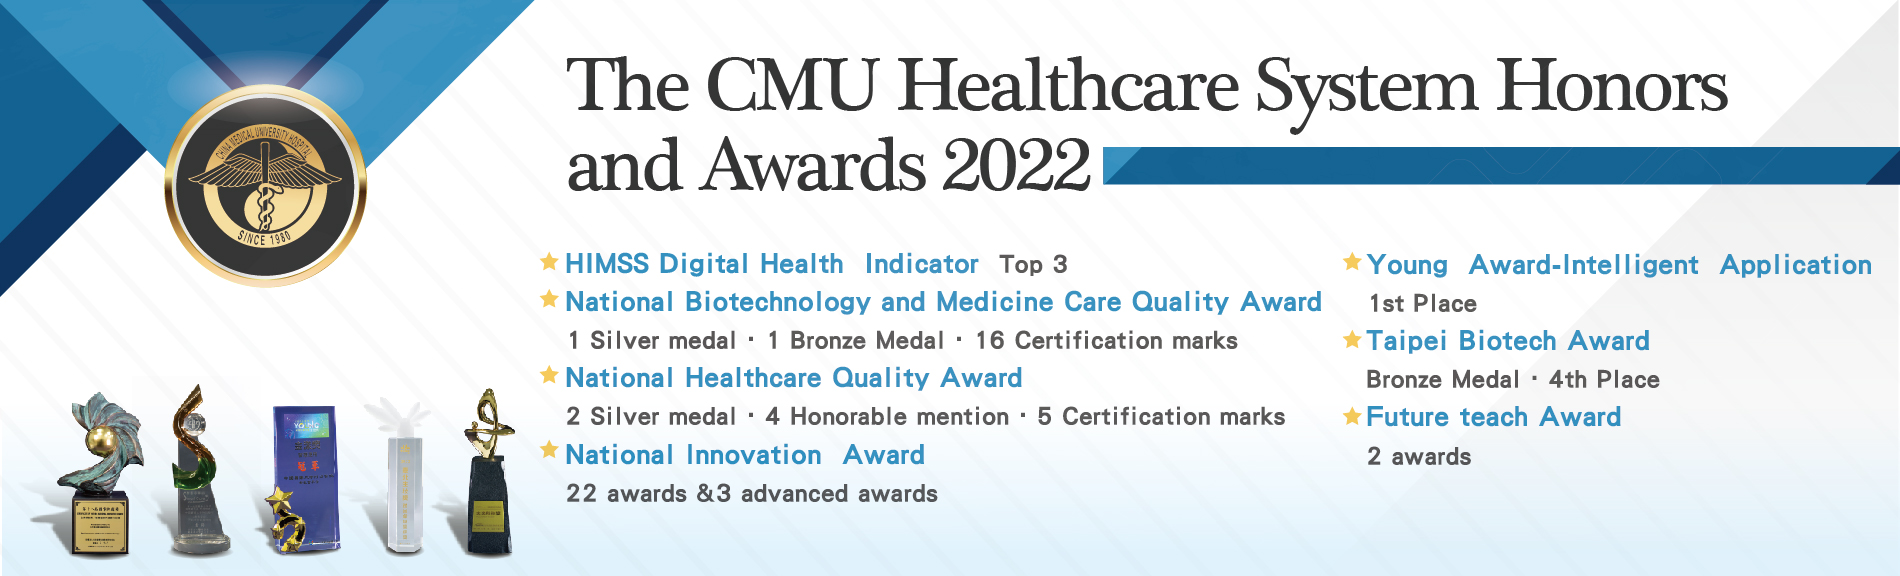 The CMU Healthcare System Honors and Awards 2022